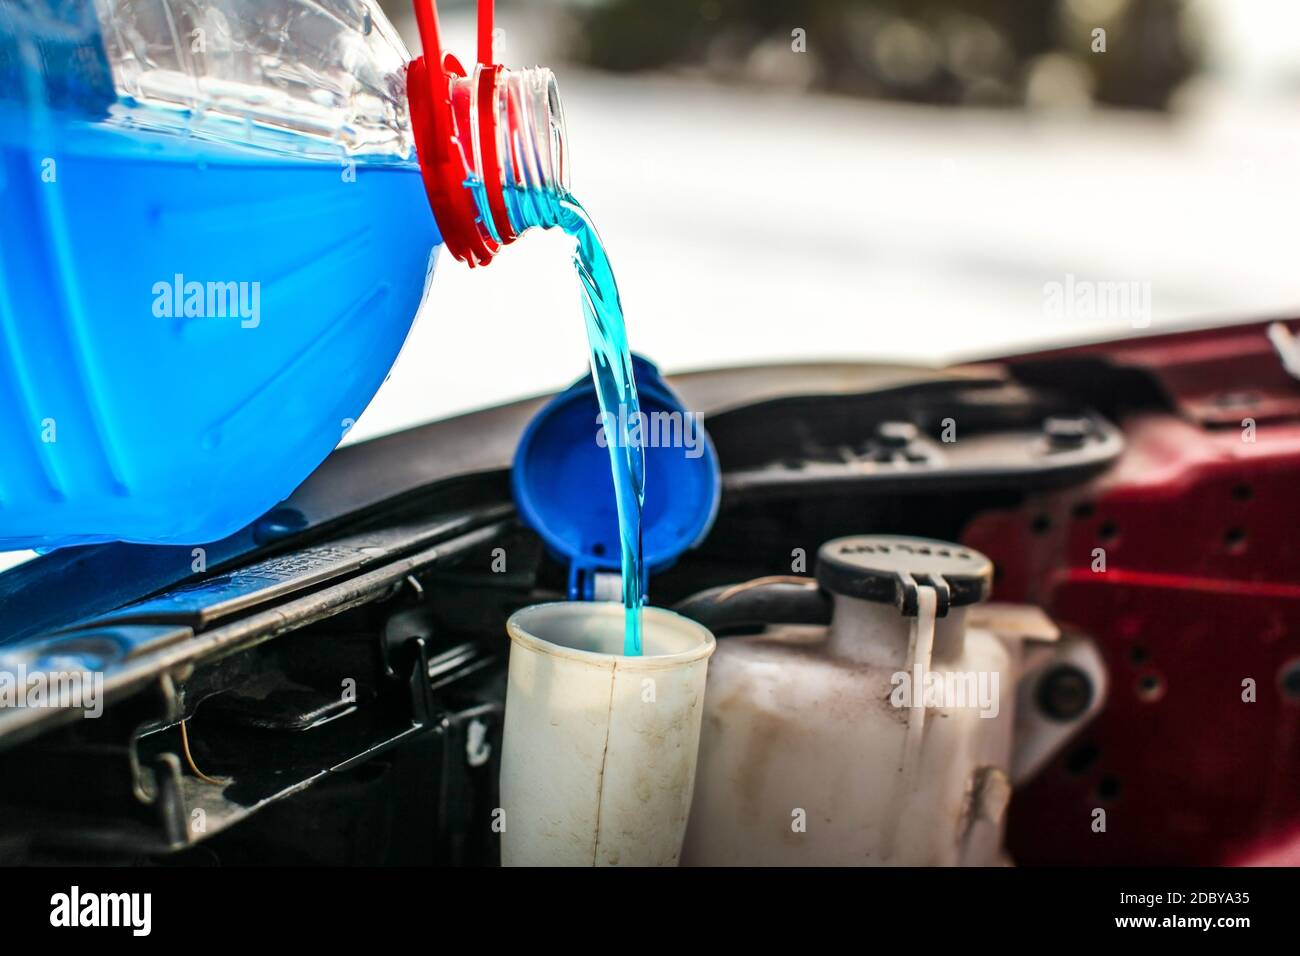 Detail on pouring antifreeze liquid screen wash into dirty car from blue and red anti freeze water container. Stock Photo